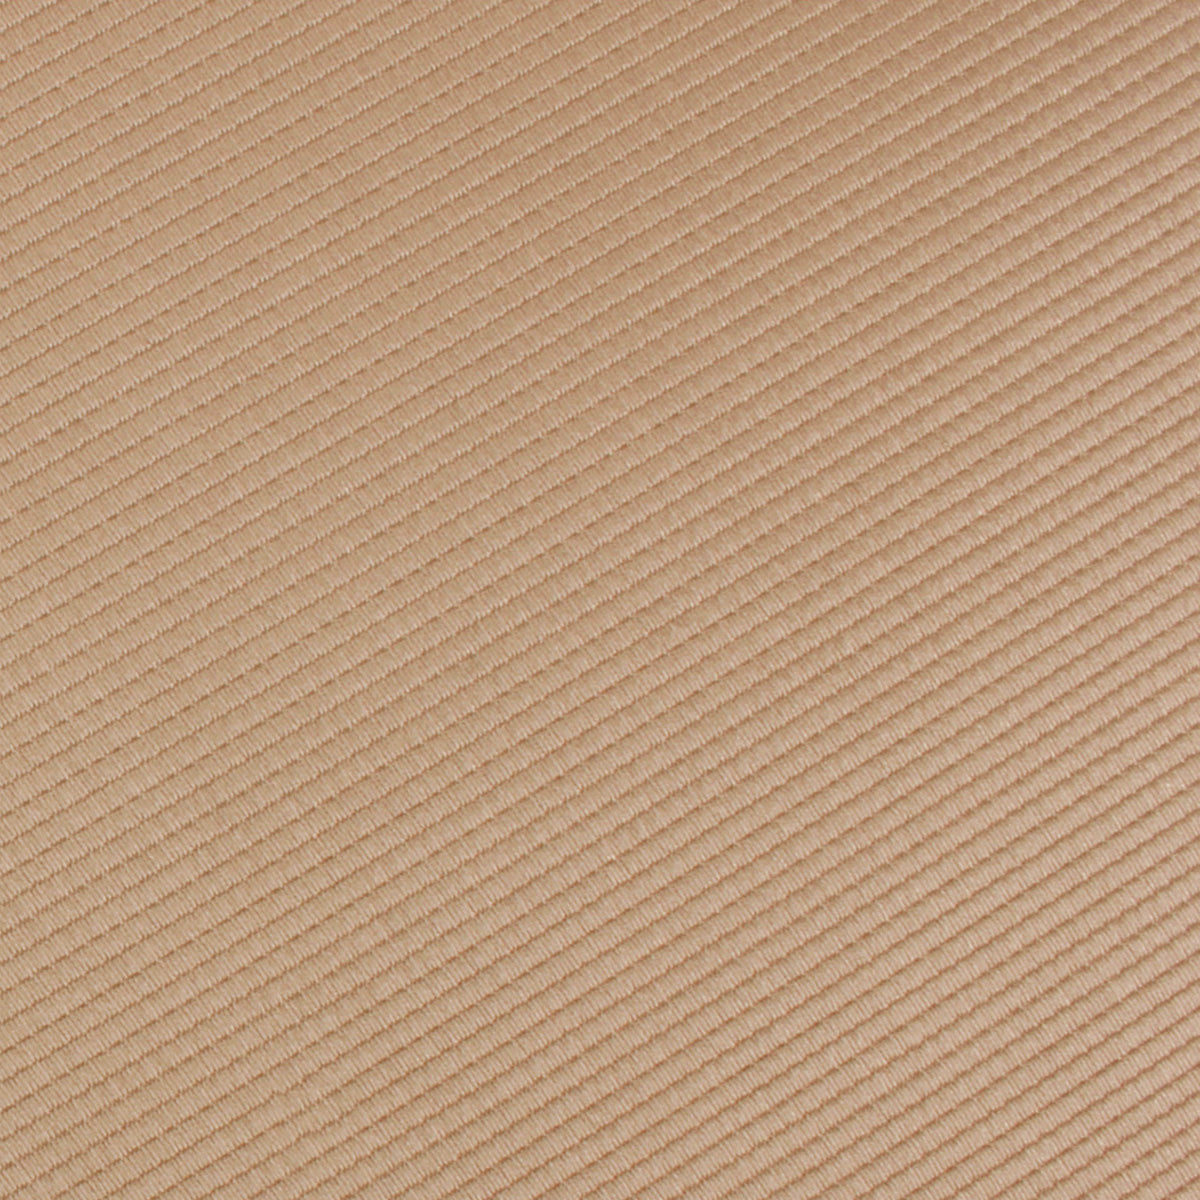 Nude Brown Twill Fabric Swatch